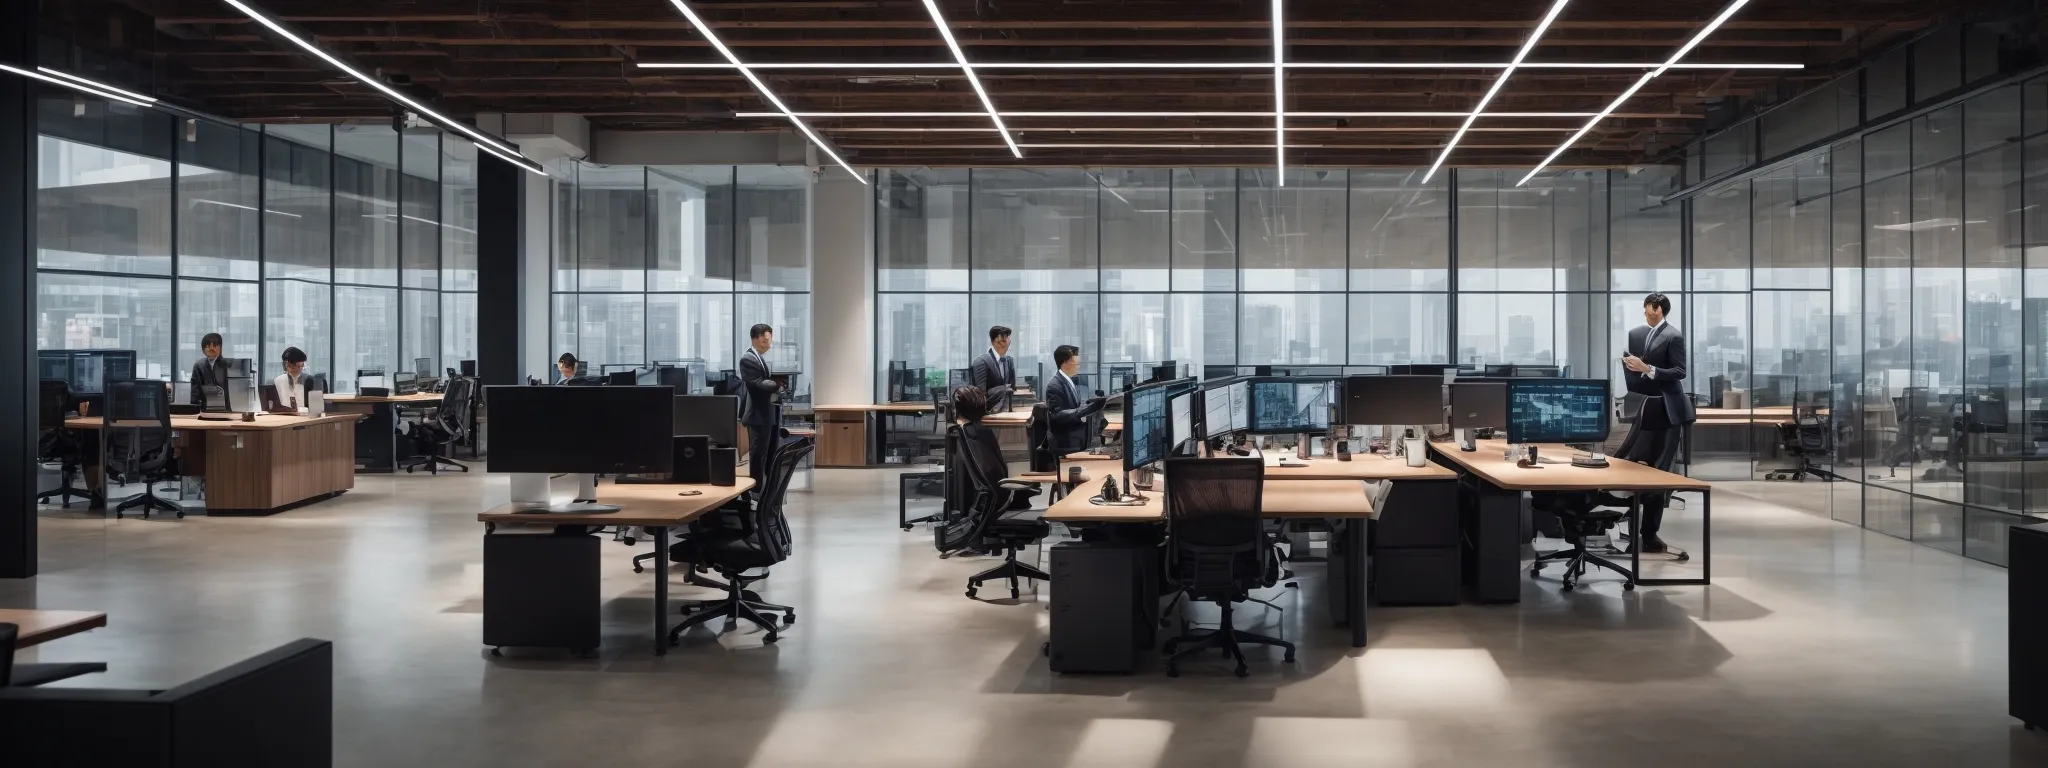 a sleek, modern office space with an expansive, open-plan layout where a team of professionals is clustered around a large digital display, analyzing dynamic graphs and performance metrics.